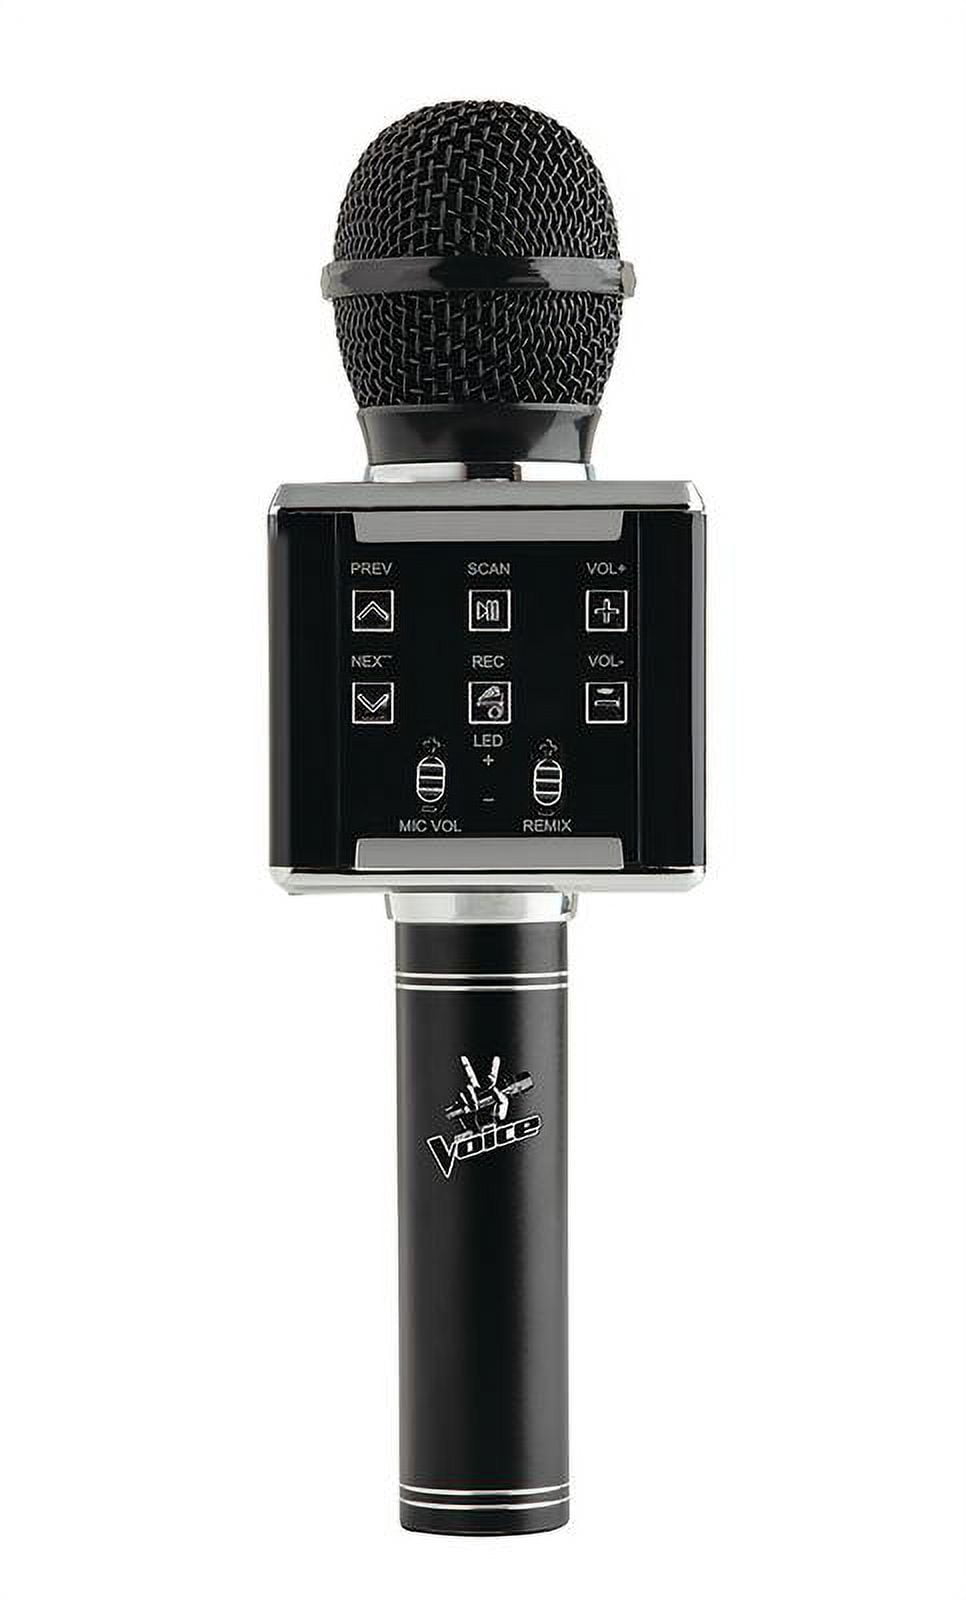 The Voice Champ Deluxe Wireless Handheld Karaoke Microphone, Speaker with  LED Lights, Multiple Sound Effects, Play Music and Record Vocals